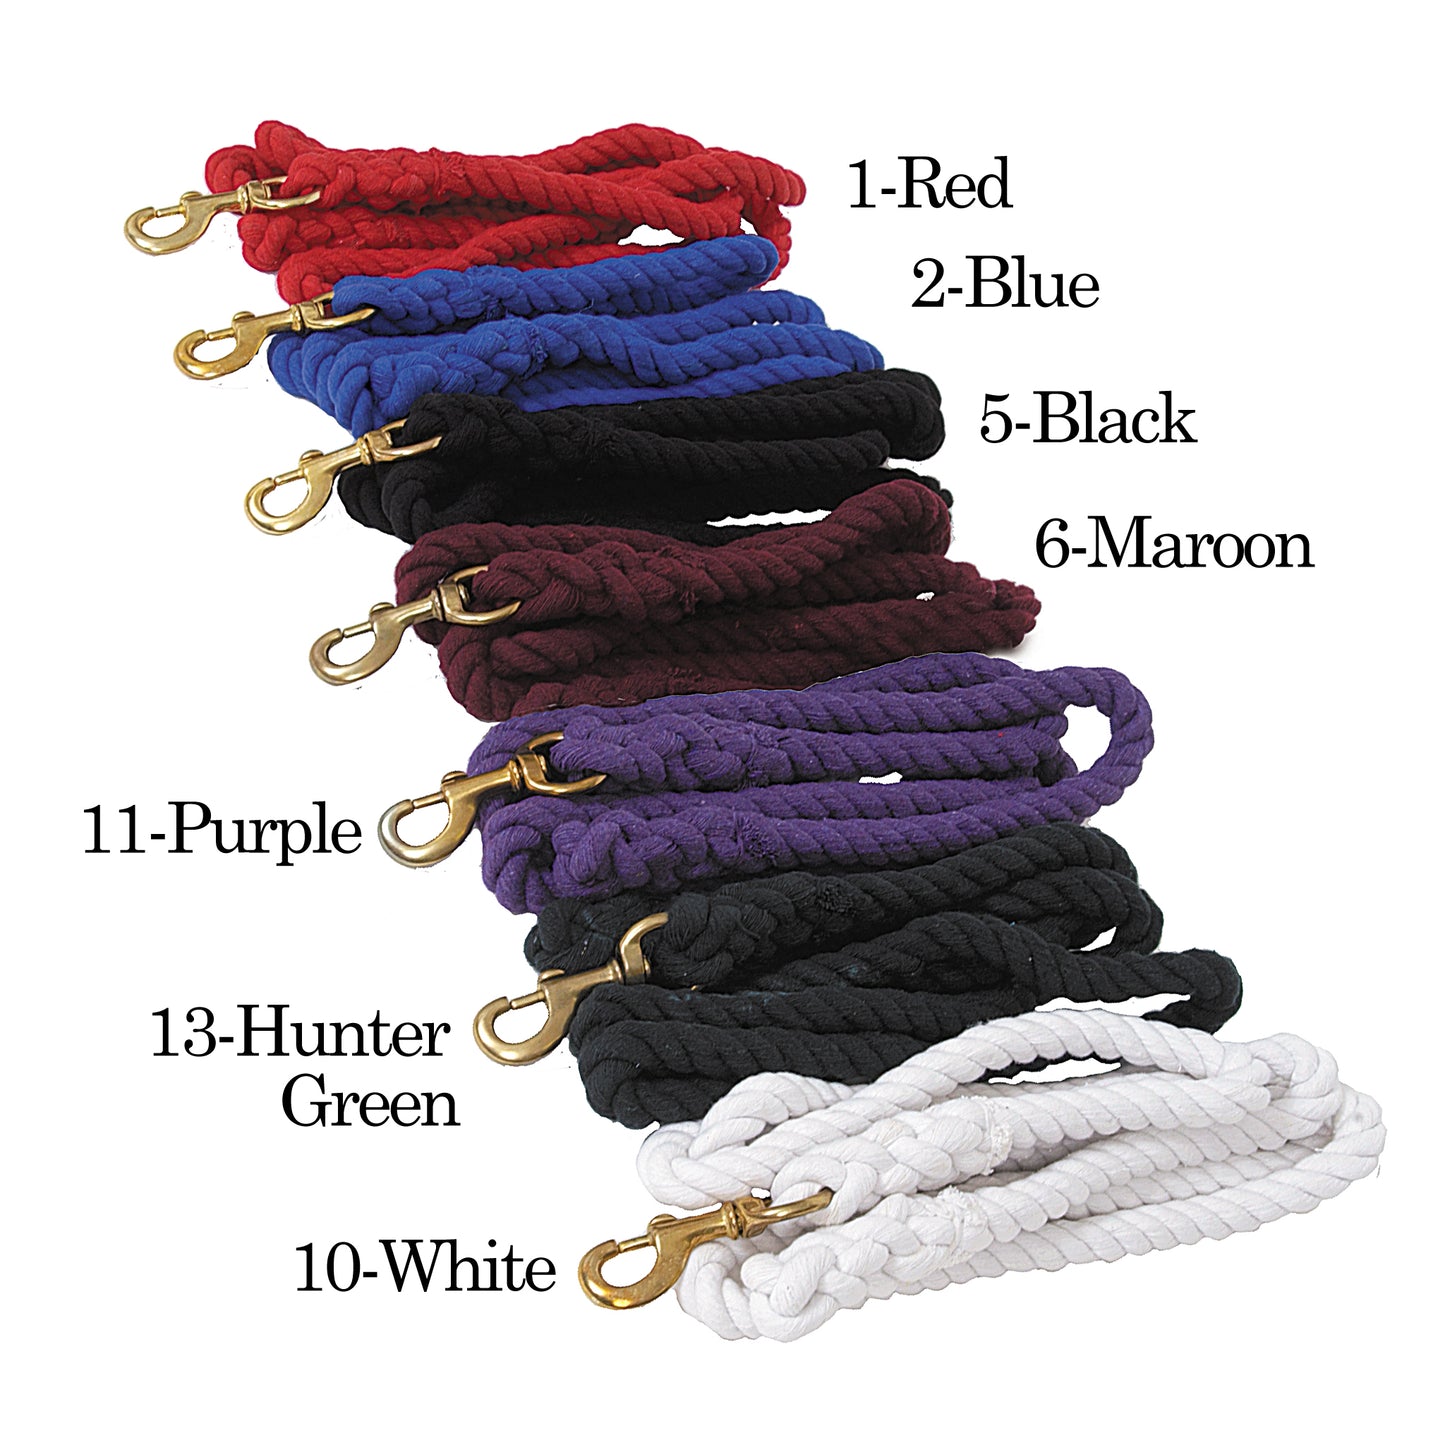 3/4" Thick Colored Cotton Leads with Brass Swivel Bolt